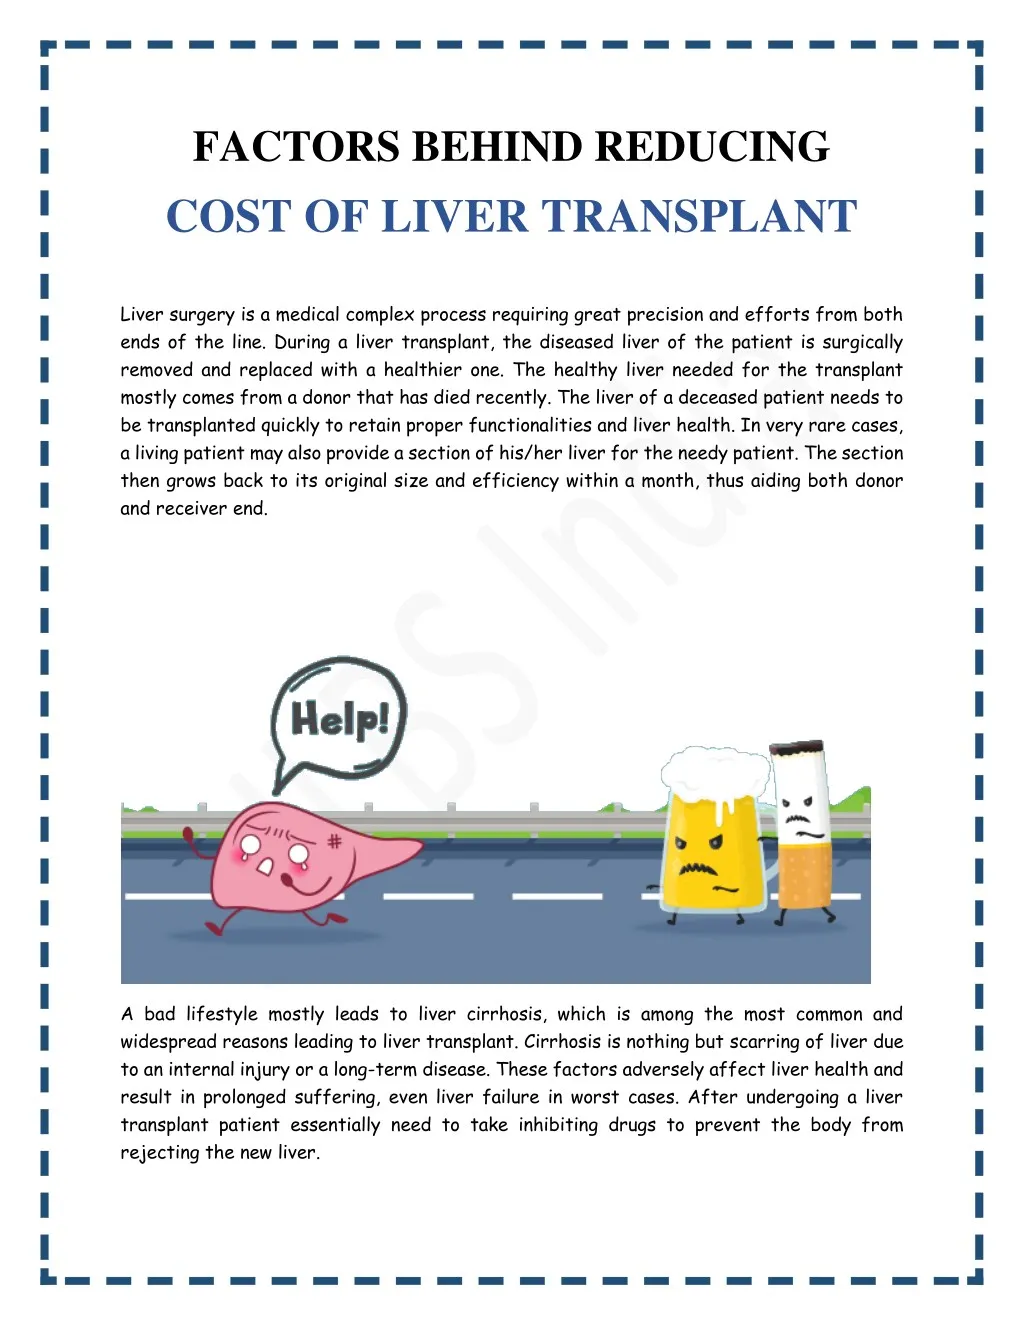 factors behind reducing cost of liver transplant